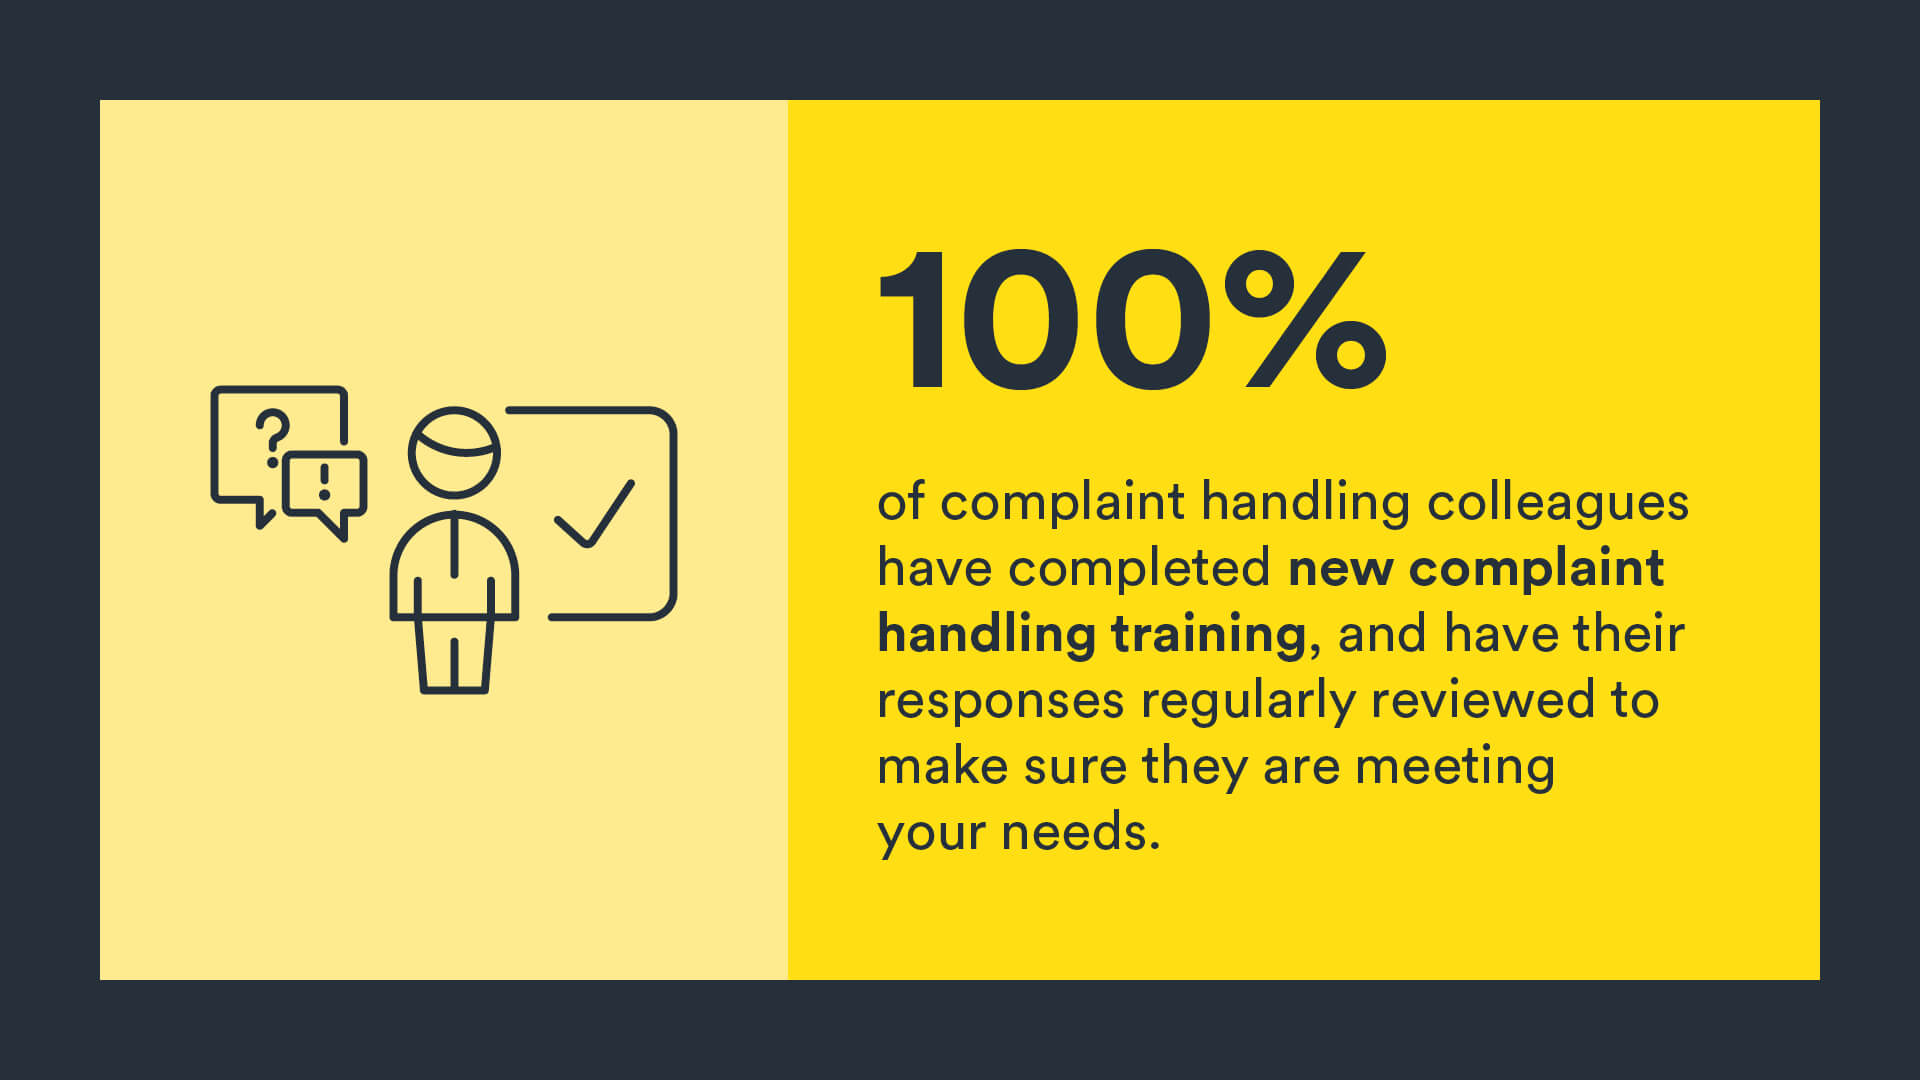 Infographic: 100% of complaint handling colleagues have completed new complaint handling training, and have their responses regularly reviewed to make sure they are meeting your needs.